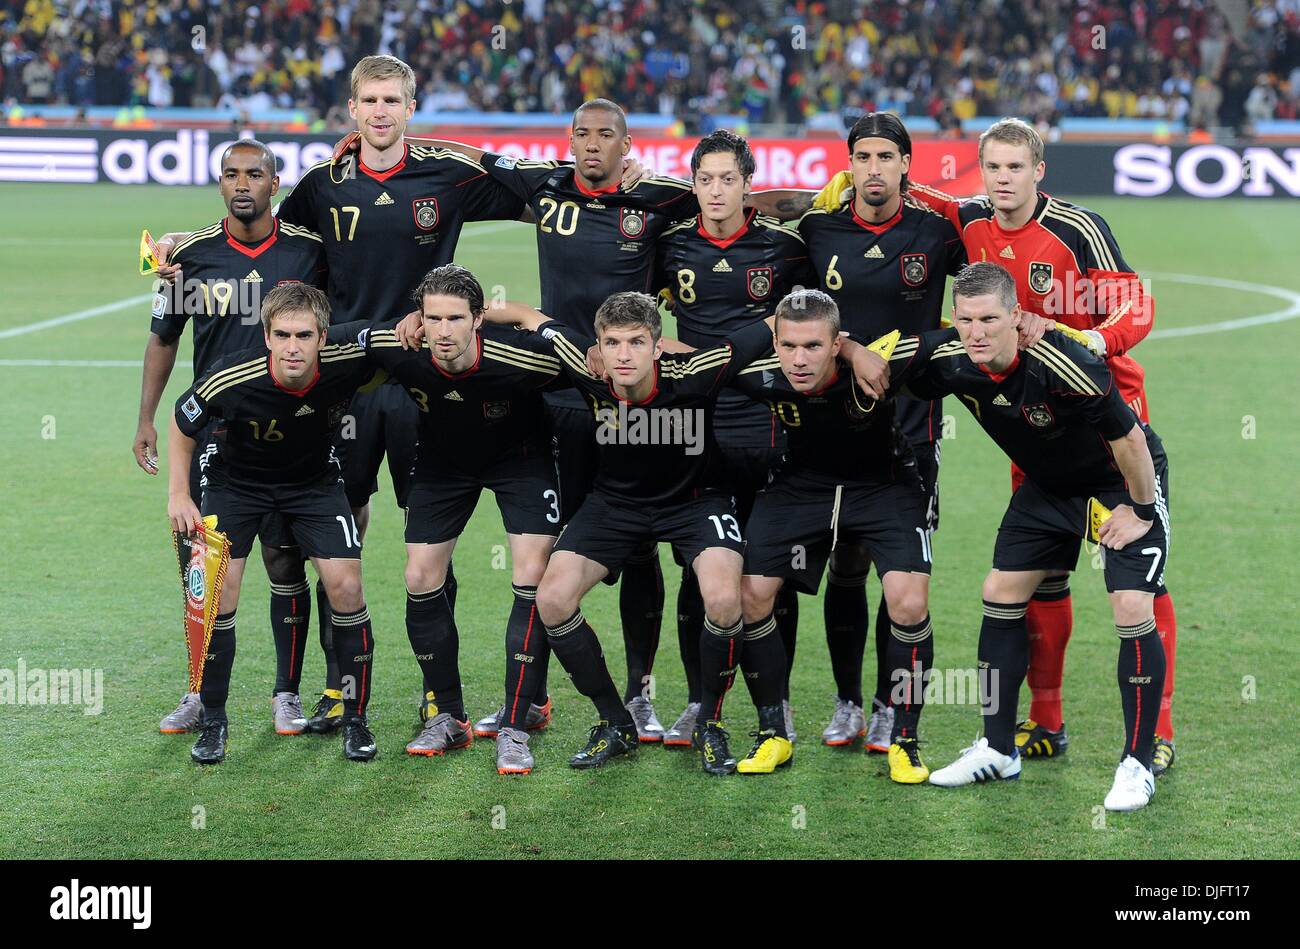 June 23, 2010 - Johannesburg, South Africa - Team of Germany poses before  the 2010 FIFA World Cup soccer match between Ghana and Germany at Soccer  City Stadium on June 23, 2010